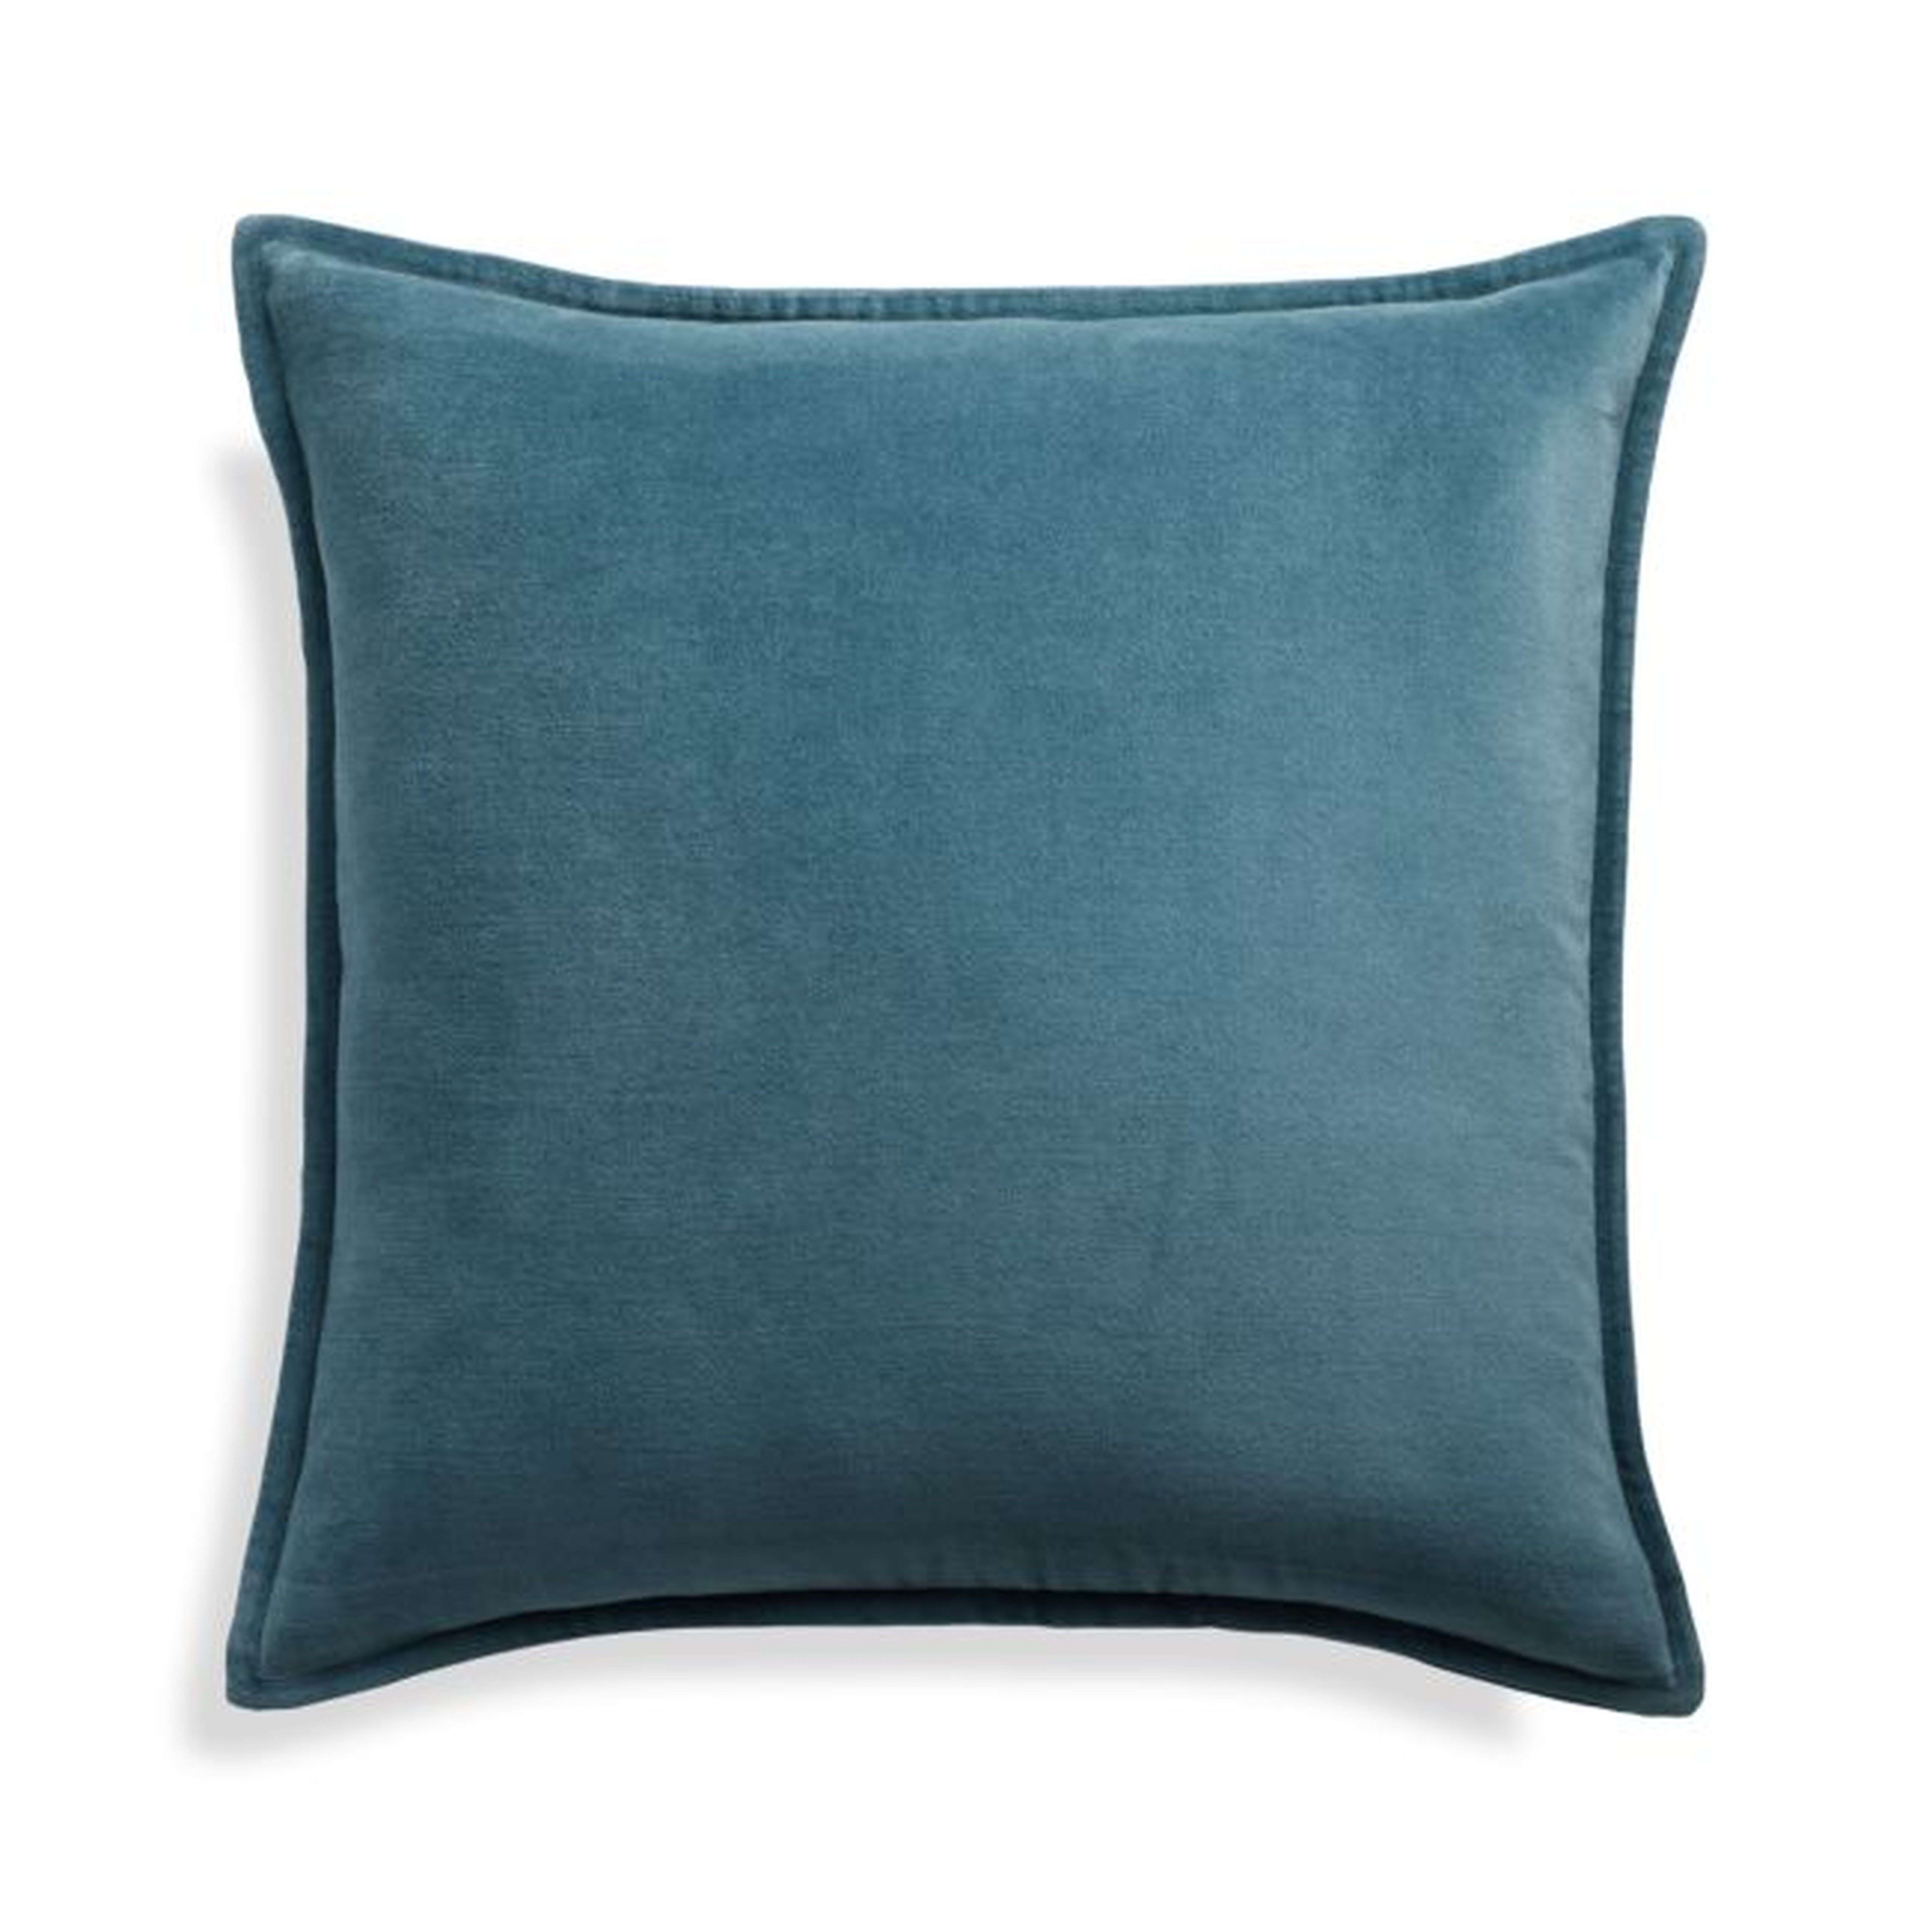 Teal 20" Washed Cotton Velvet Pillow Cover - Crate and Barrel